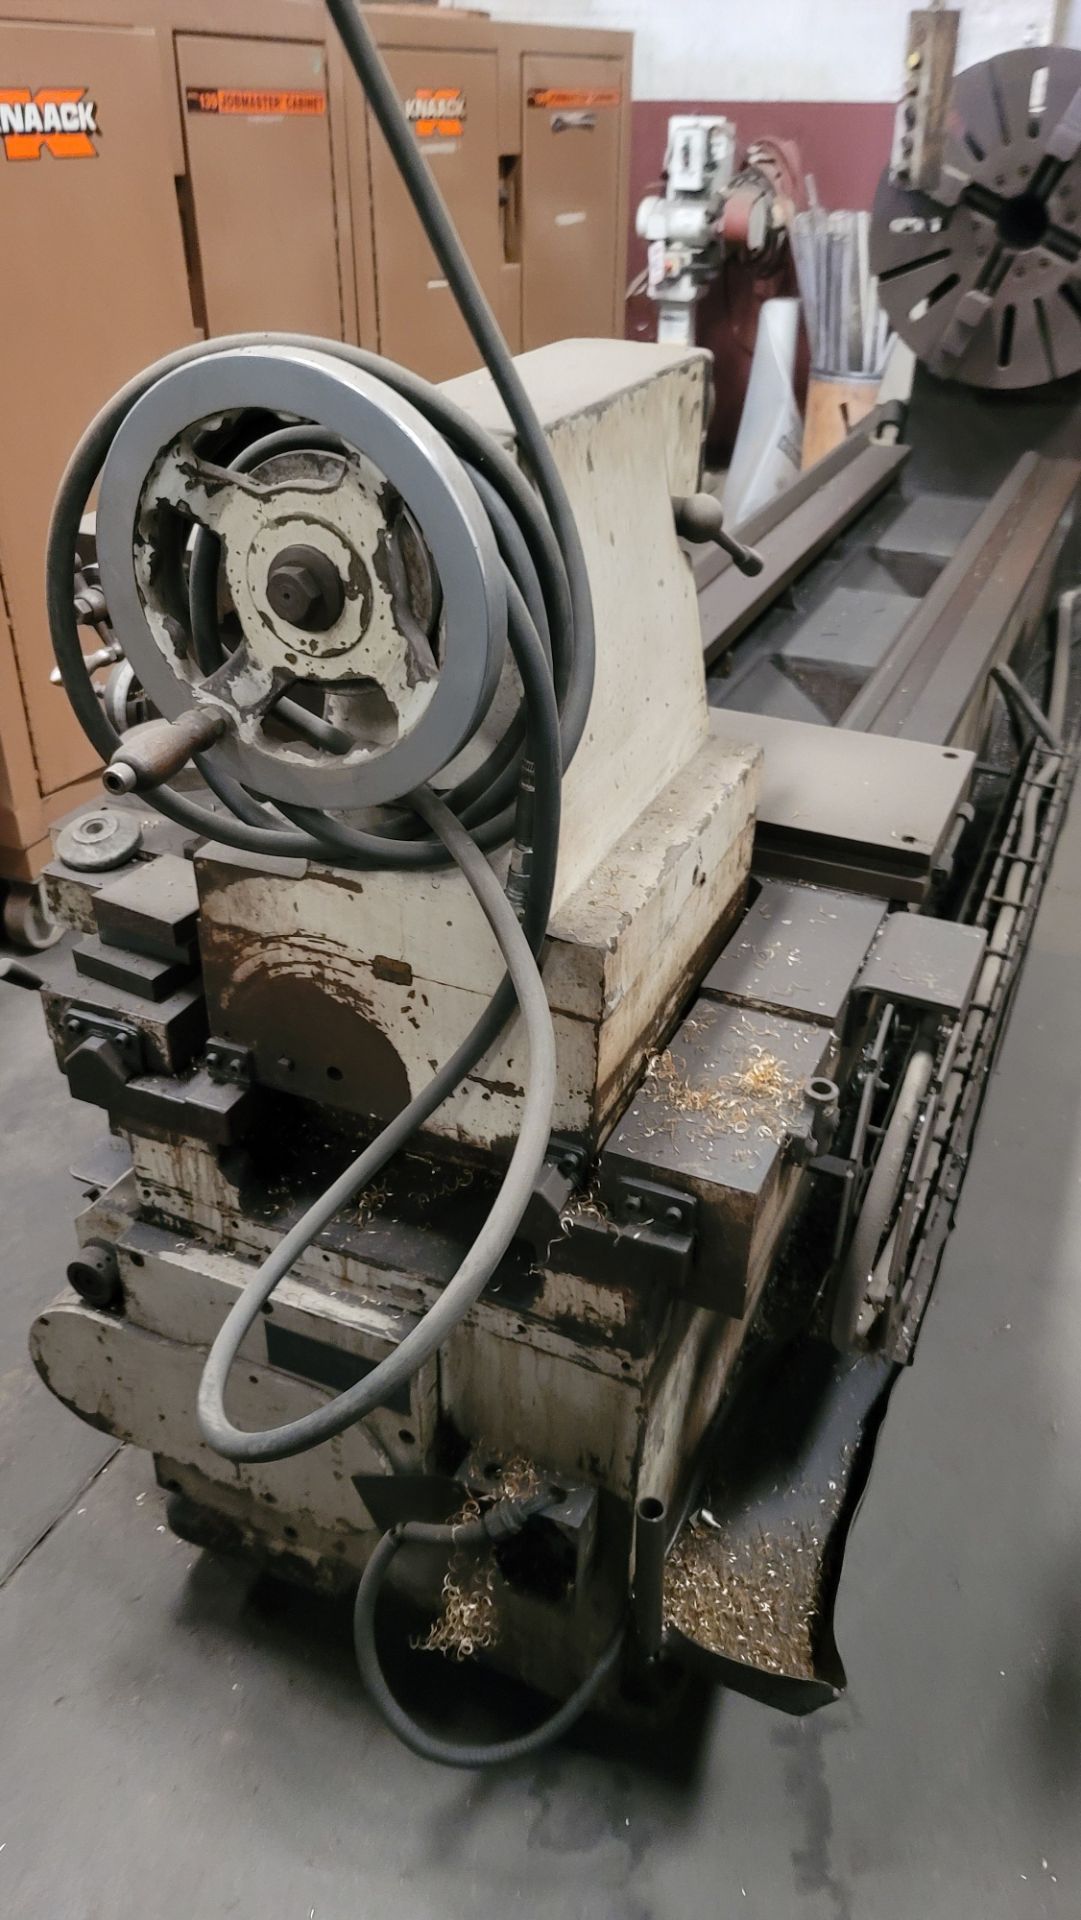 CADILLAC GAP BED ENGINE LATHE, MODEL 32120, 32" X 120", 42" SWING IN GAP, TAILSTOCK, S/N 267014 - Image 9 of 10